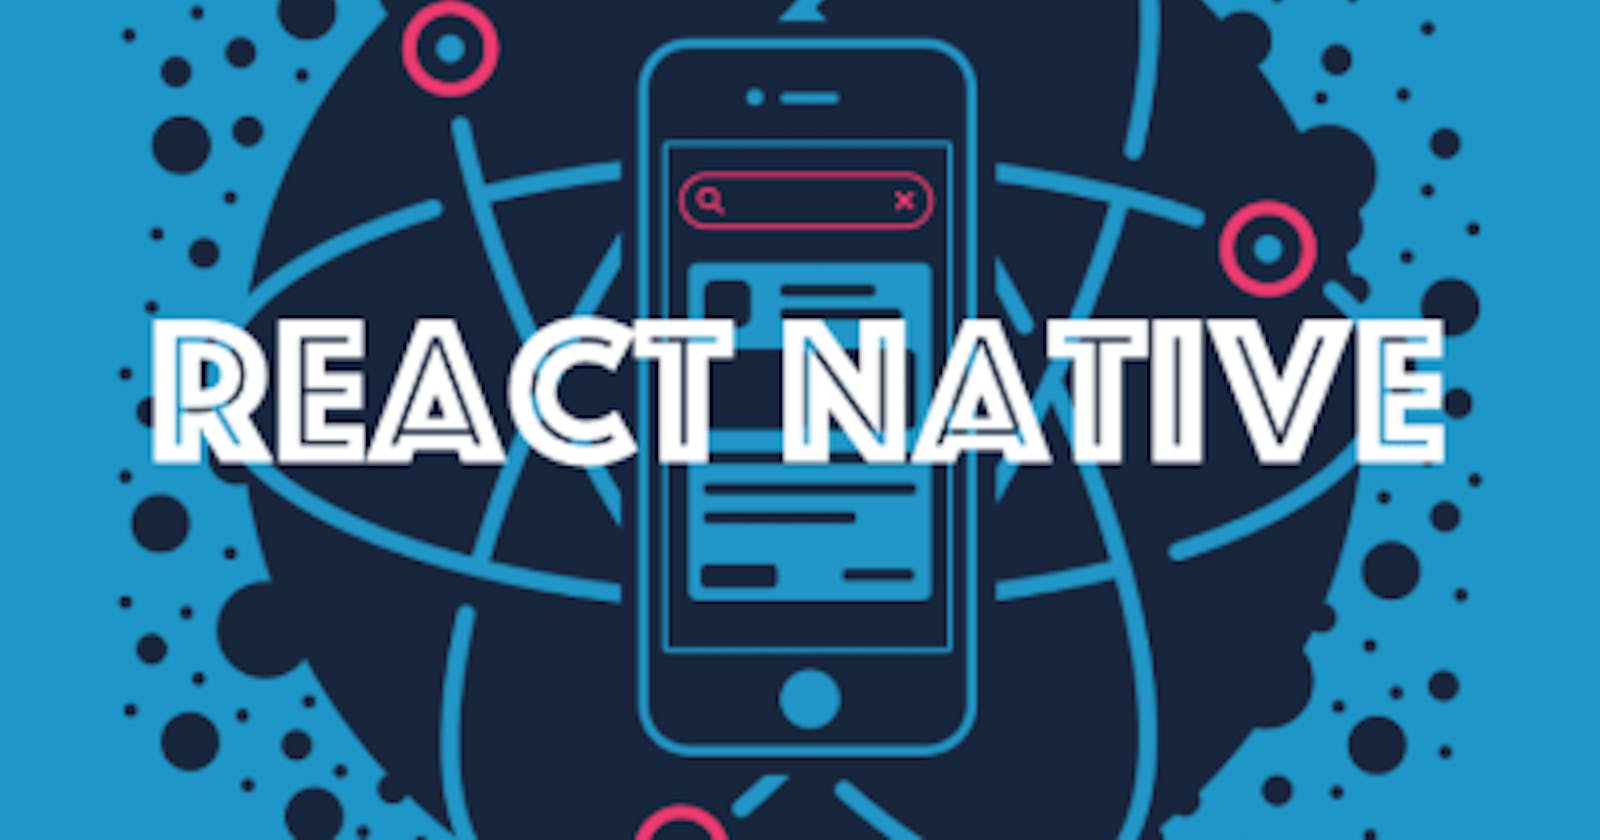 React Native Development concepts - Application Lifecycle methods